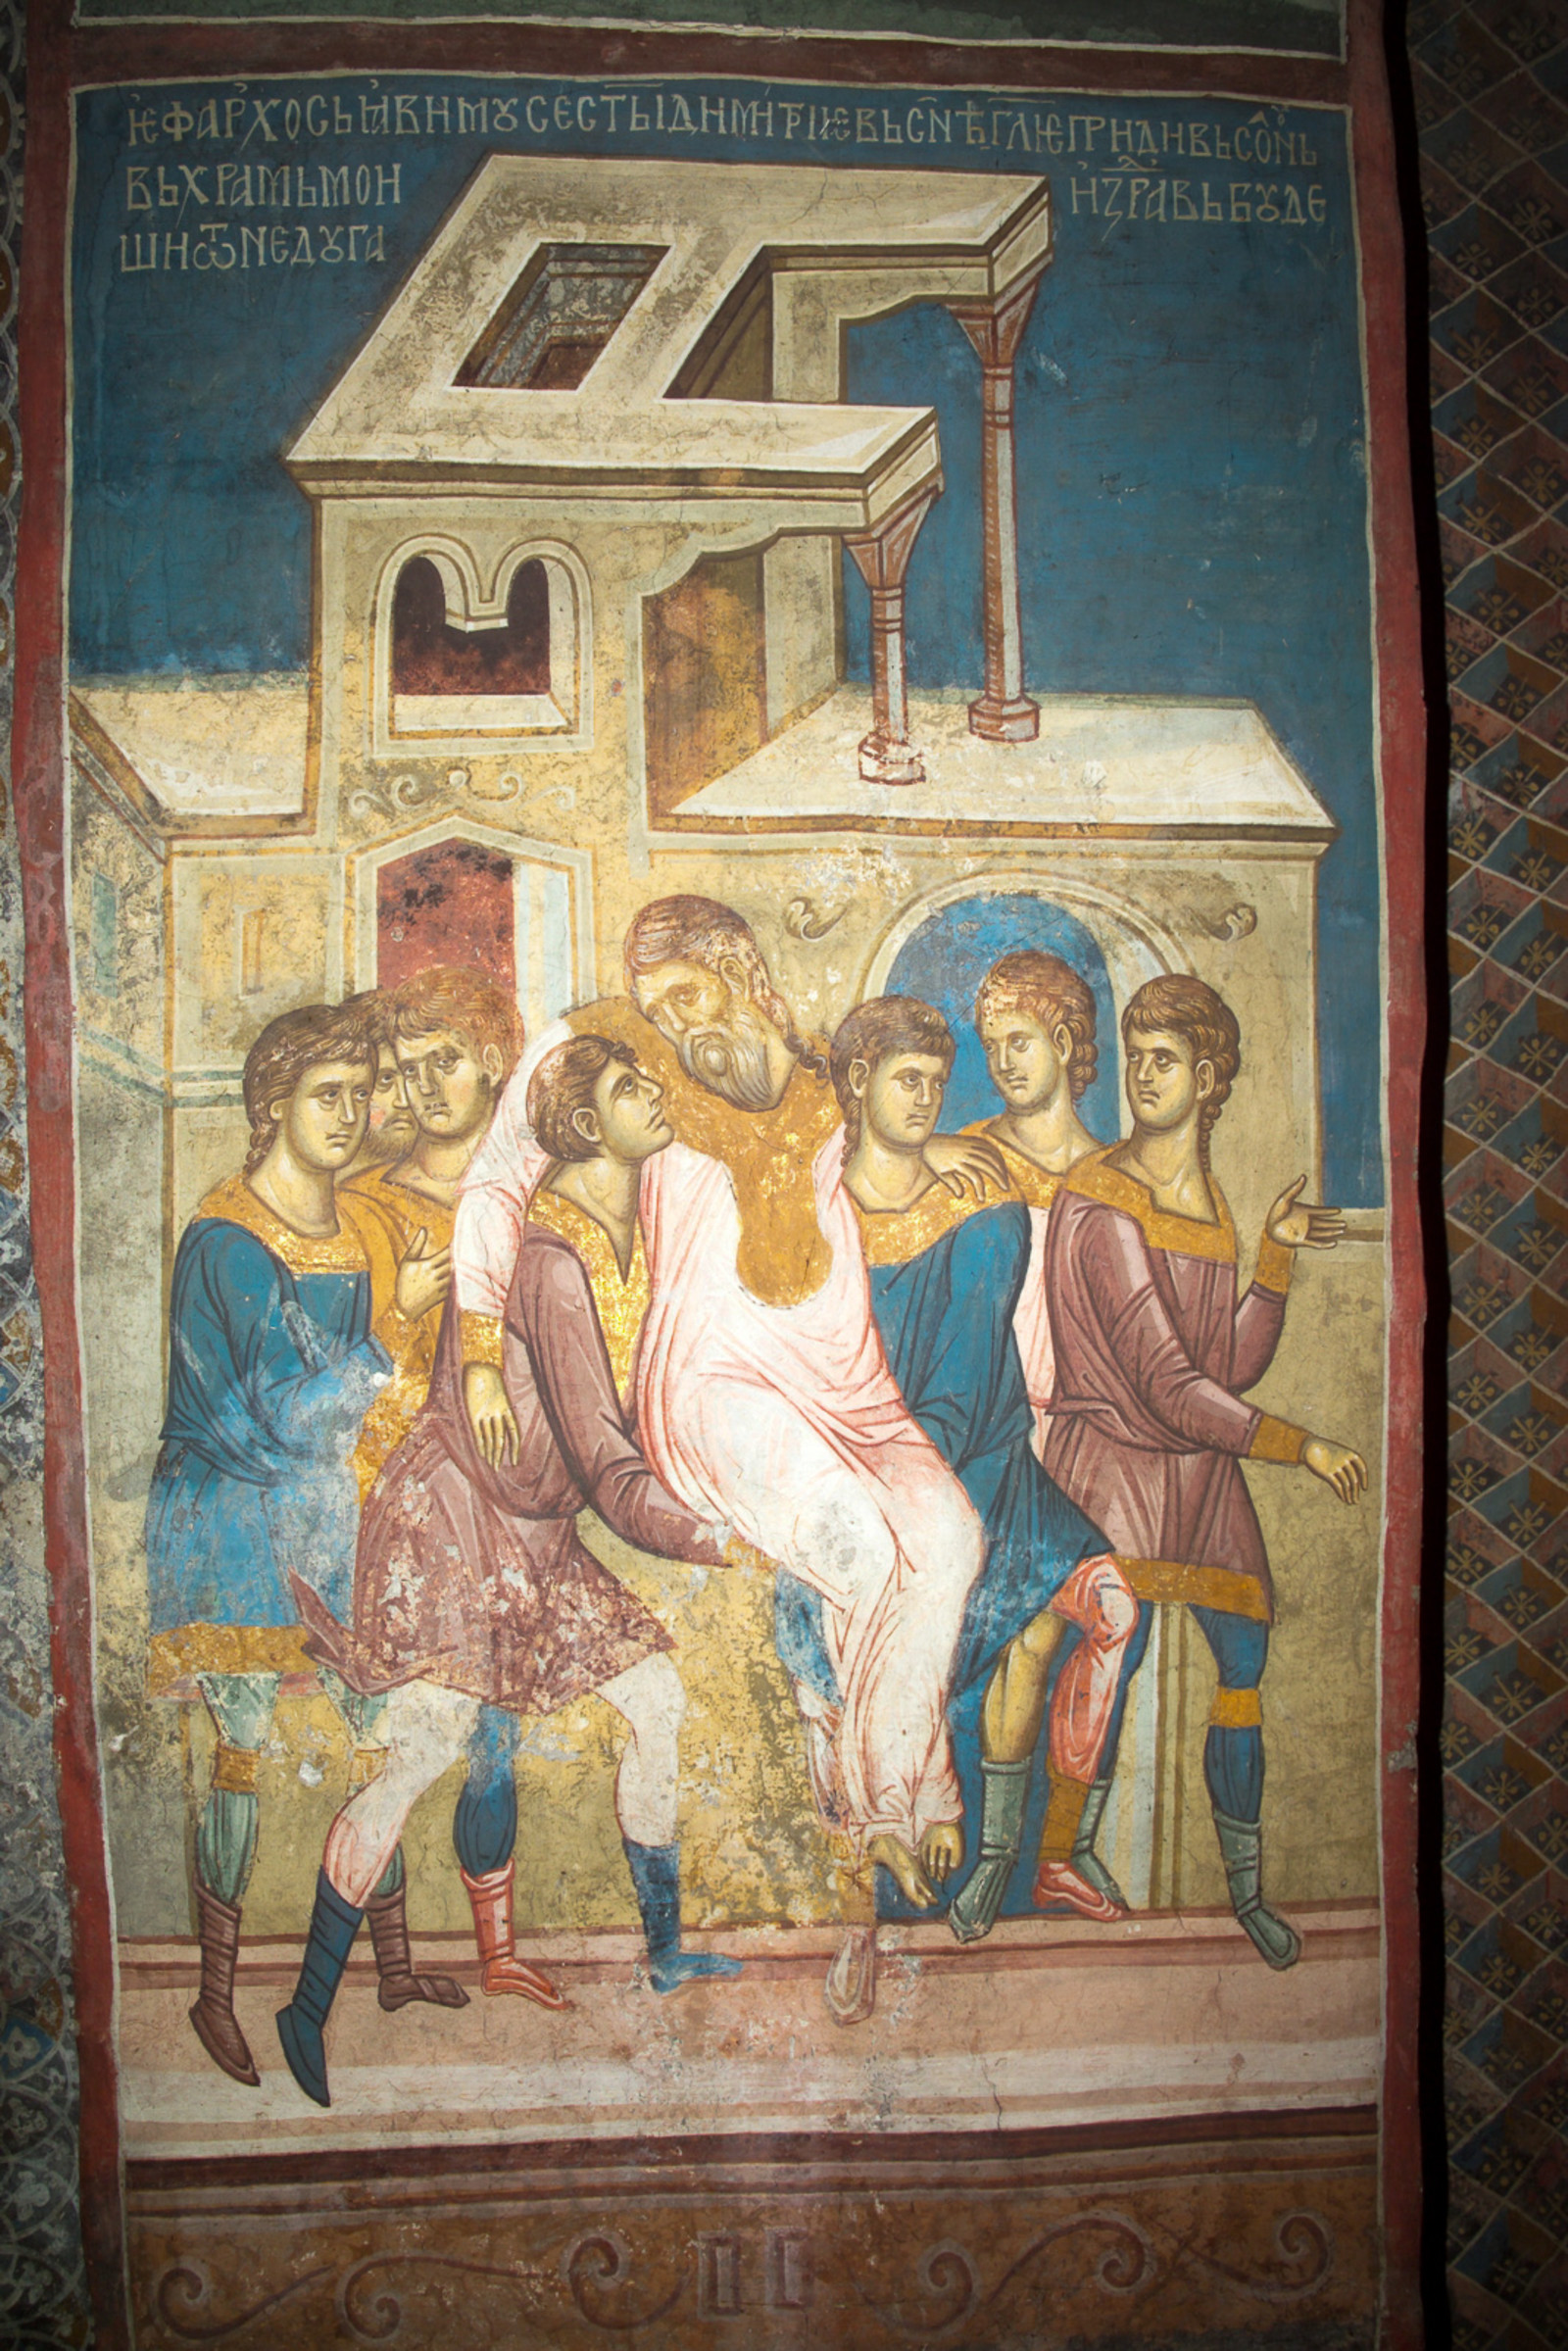 63 Eparchus of Illyricum is Carried to the Temple of St. Demetrius to Be Healed